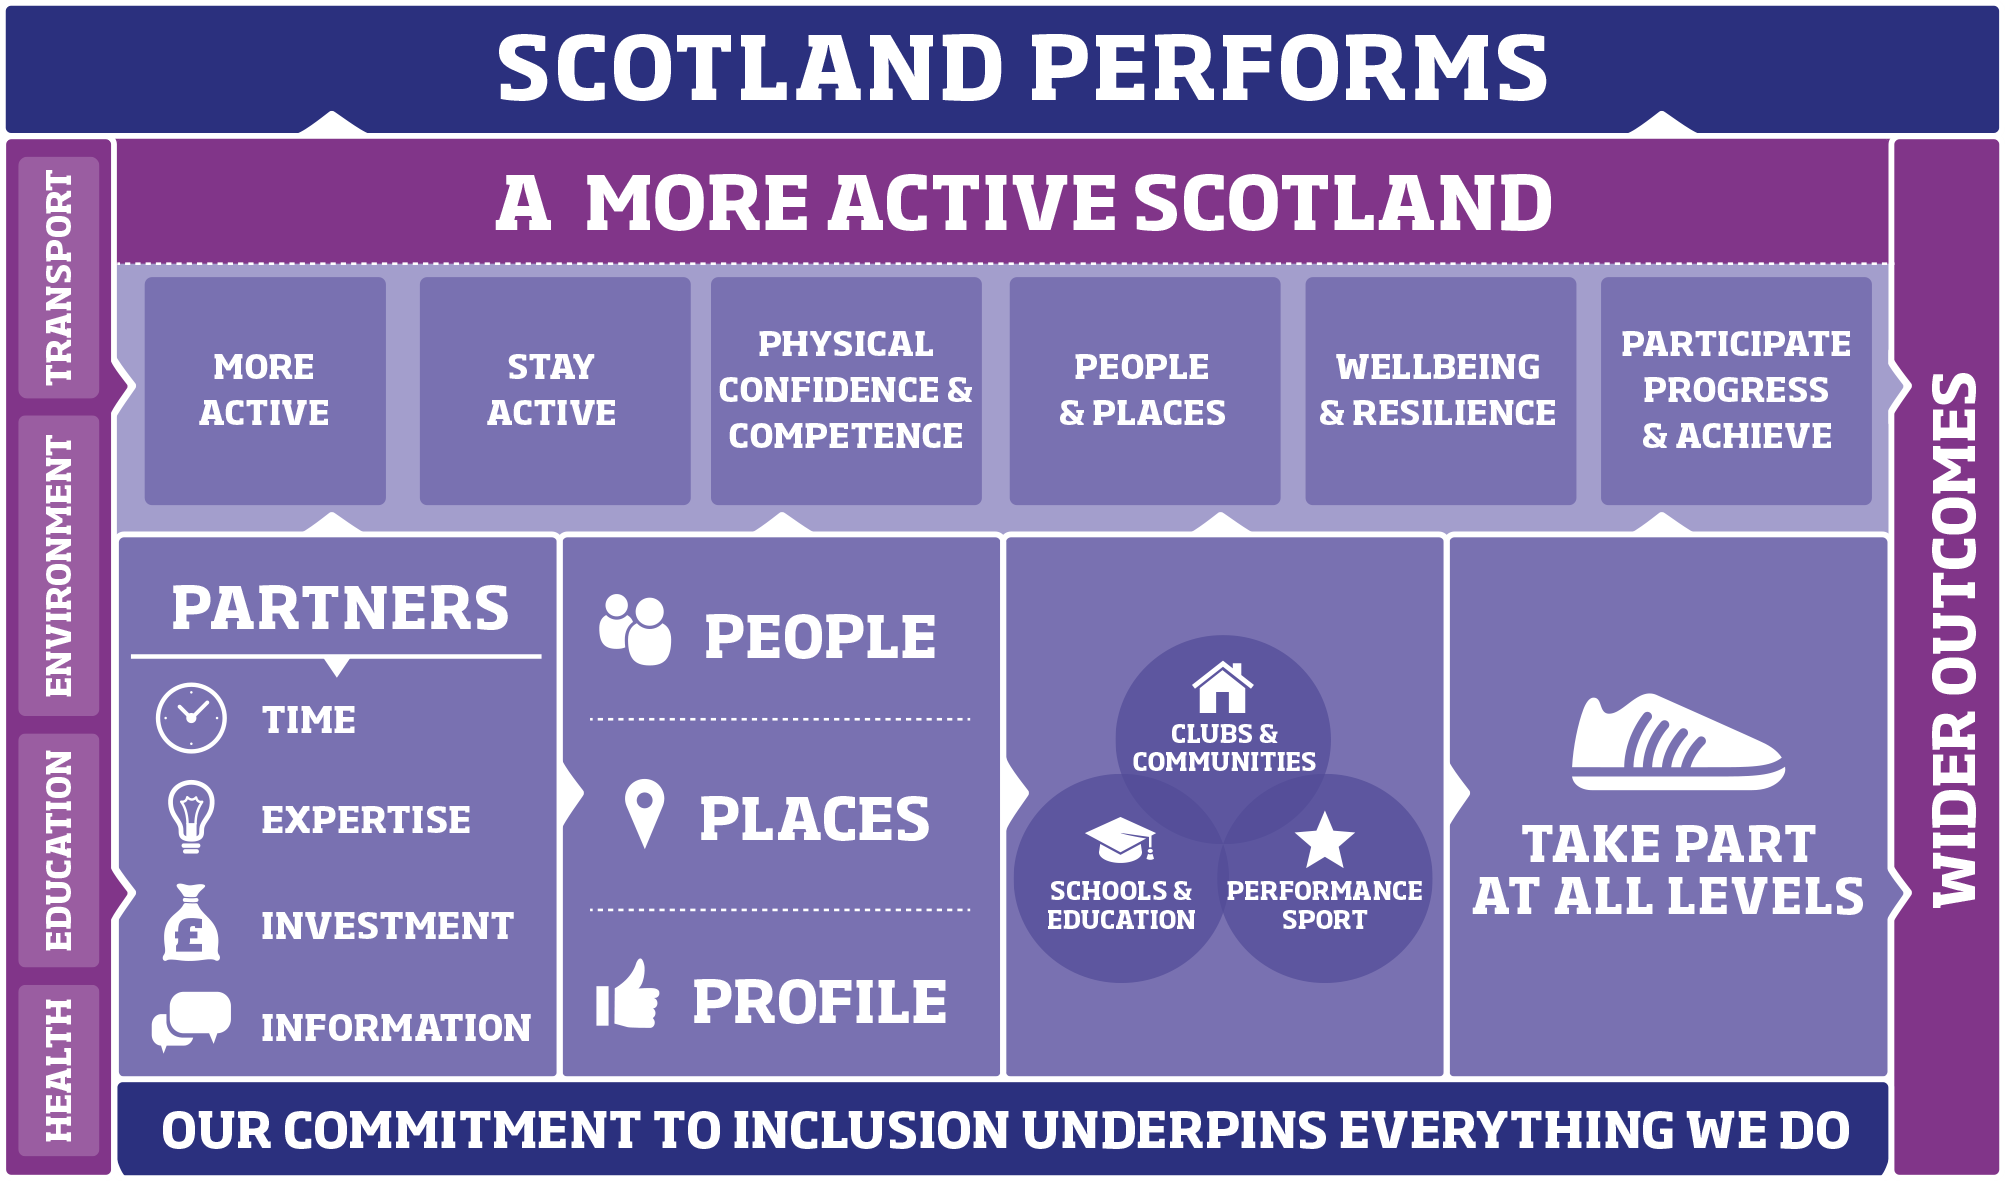 Visual representation of the sporting system in Scotland